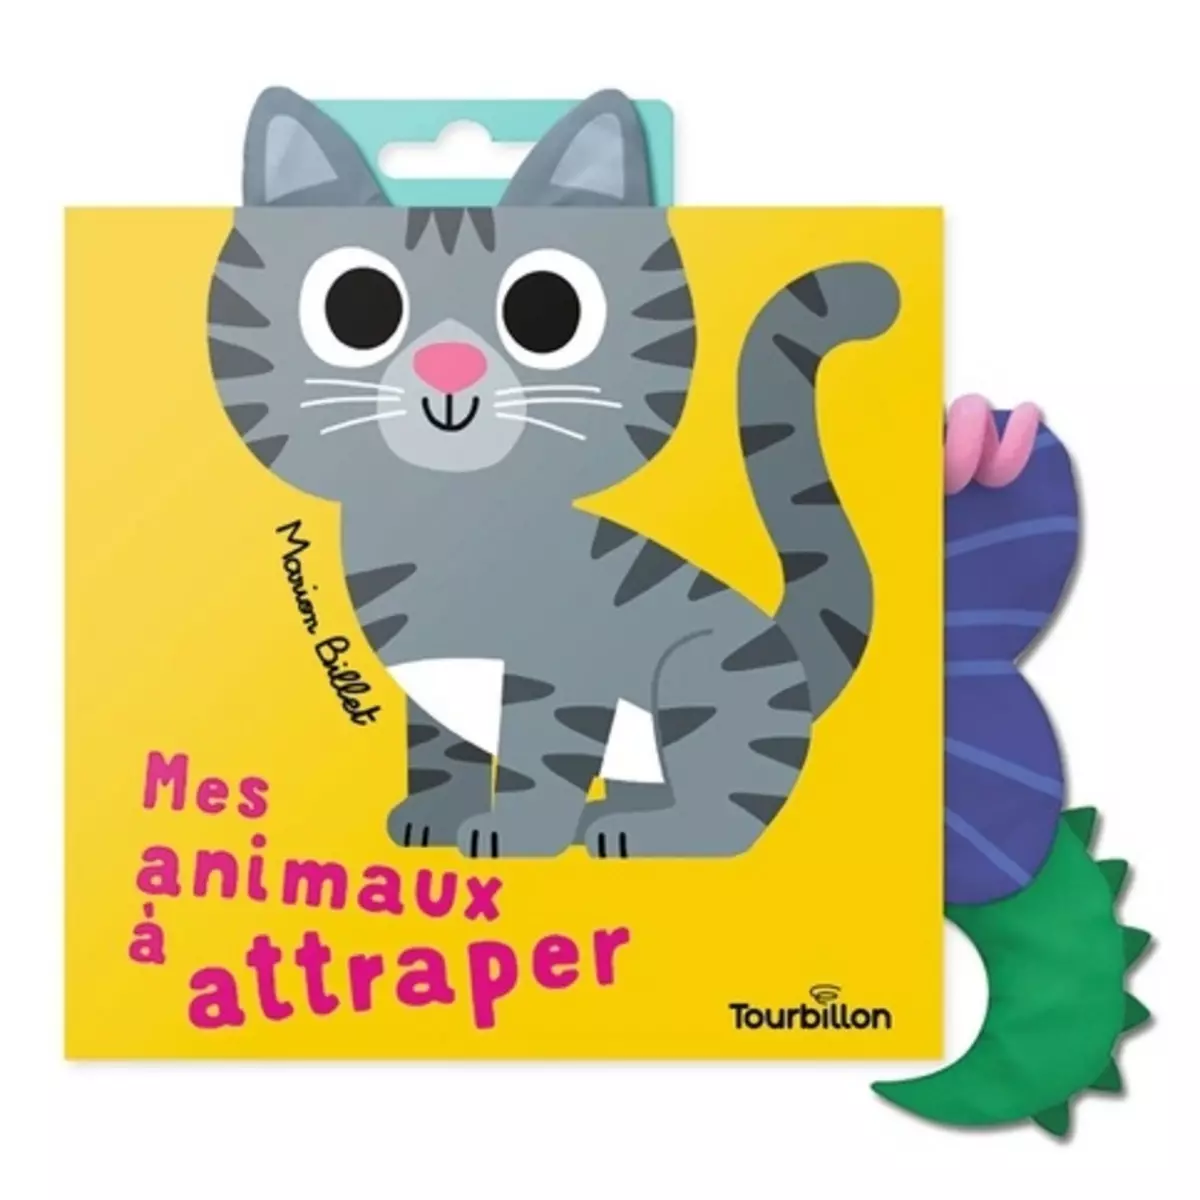  MES ANIMAUX A ATTRAPER, Billet Marion